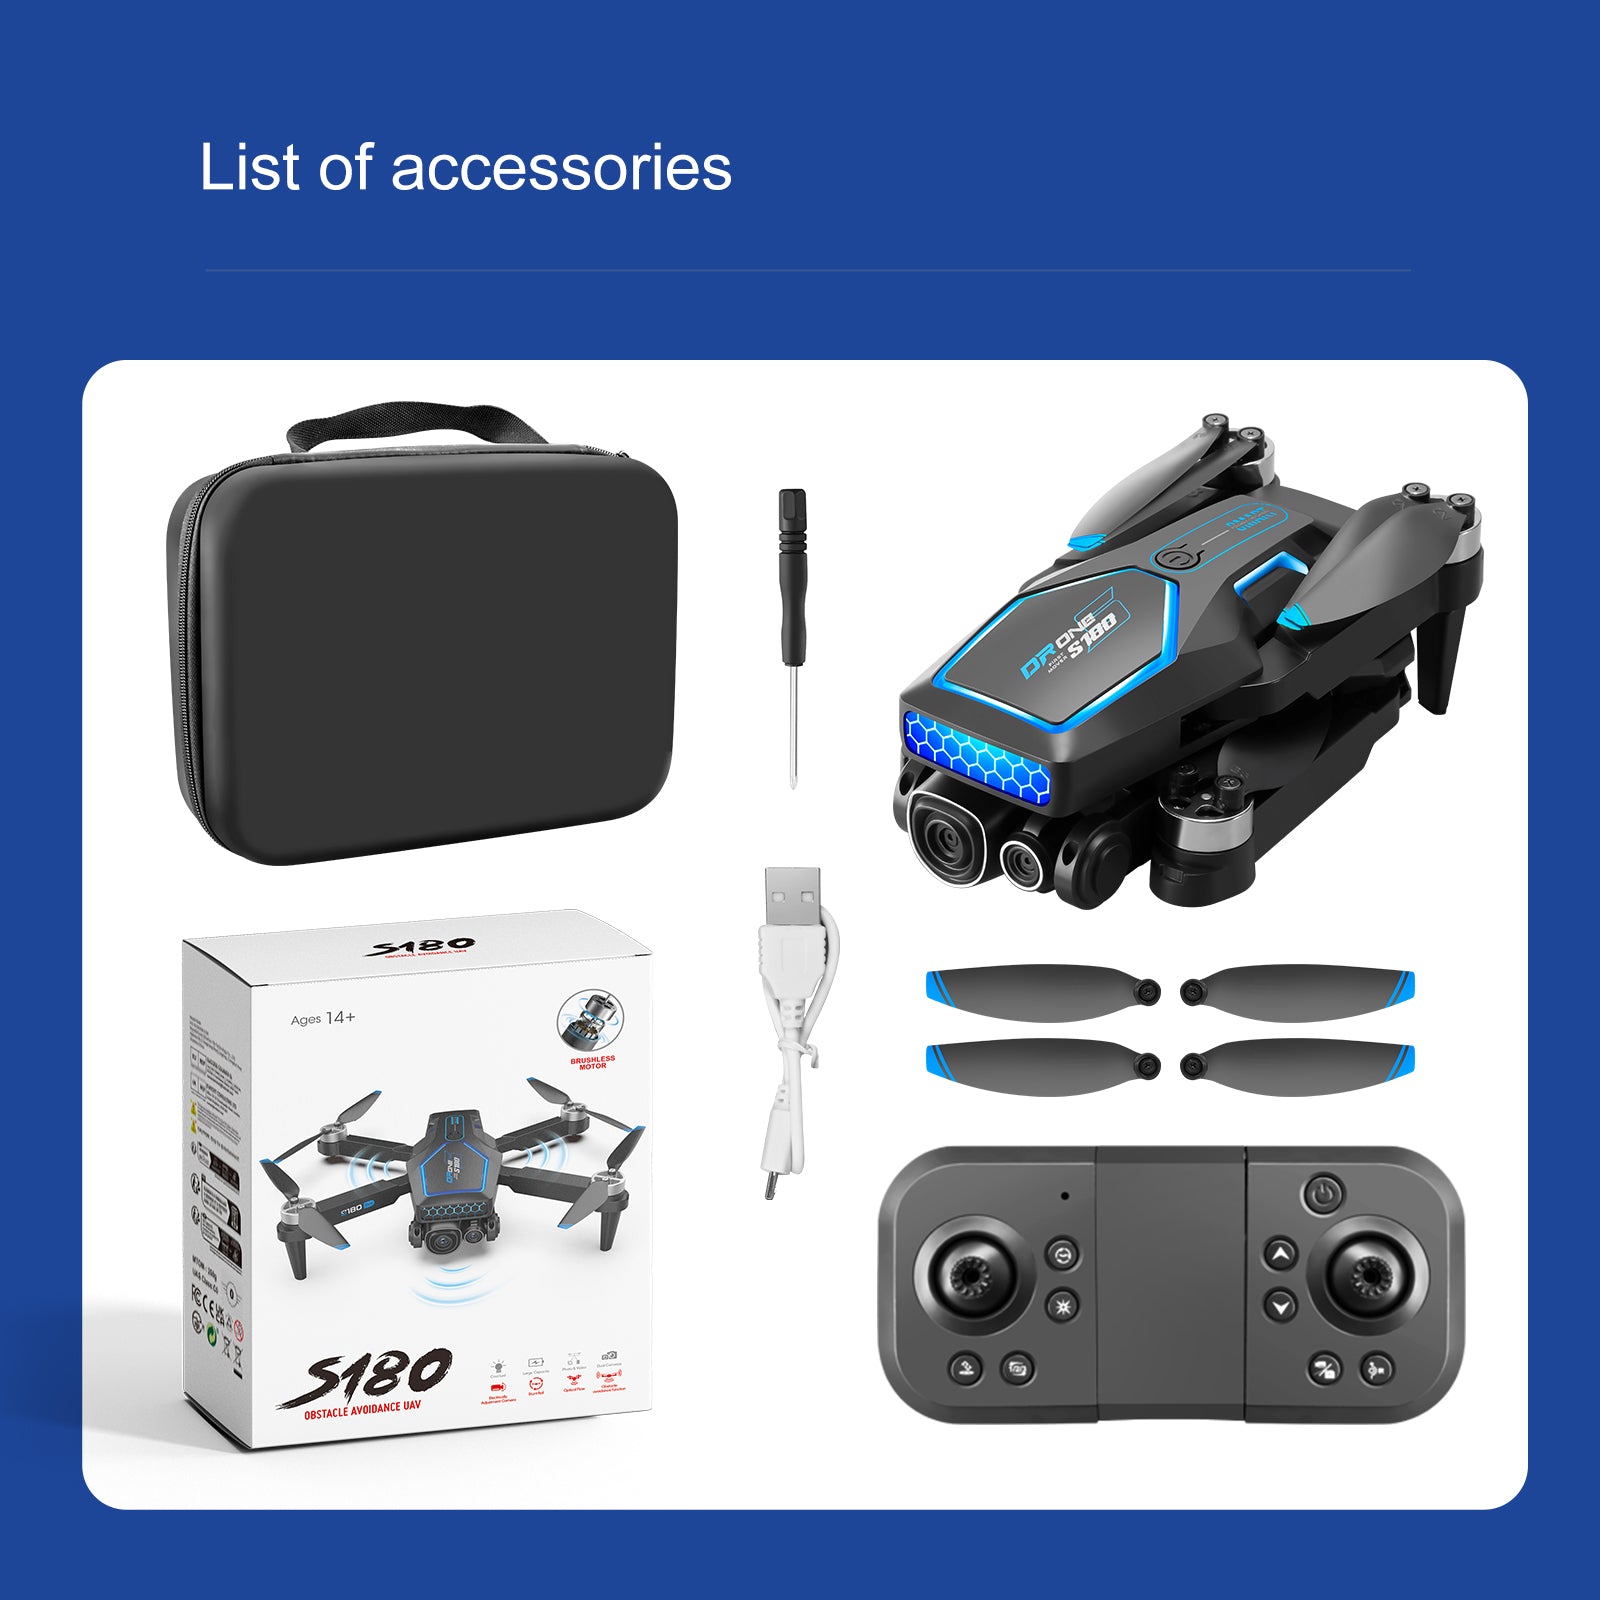 S180 Drone, Sturdy drone with accessories, ideal for ages 14+, featuring obstacle avoidance and a 312-foot range.